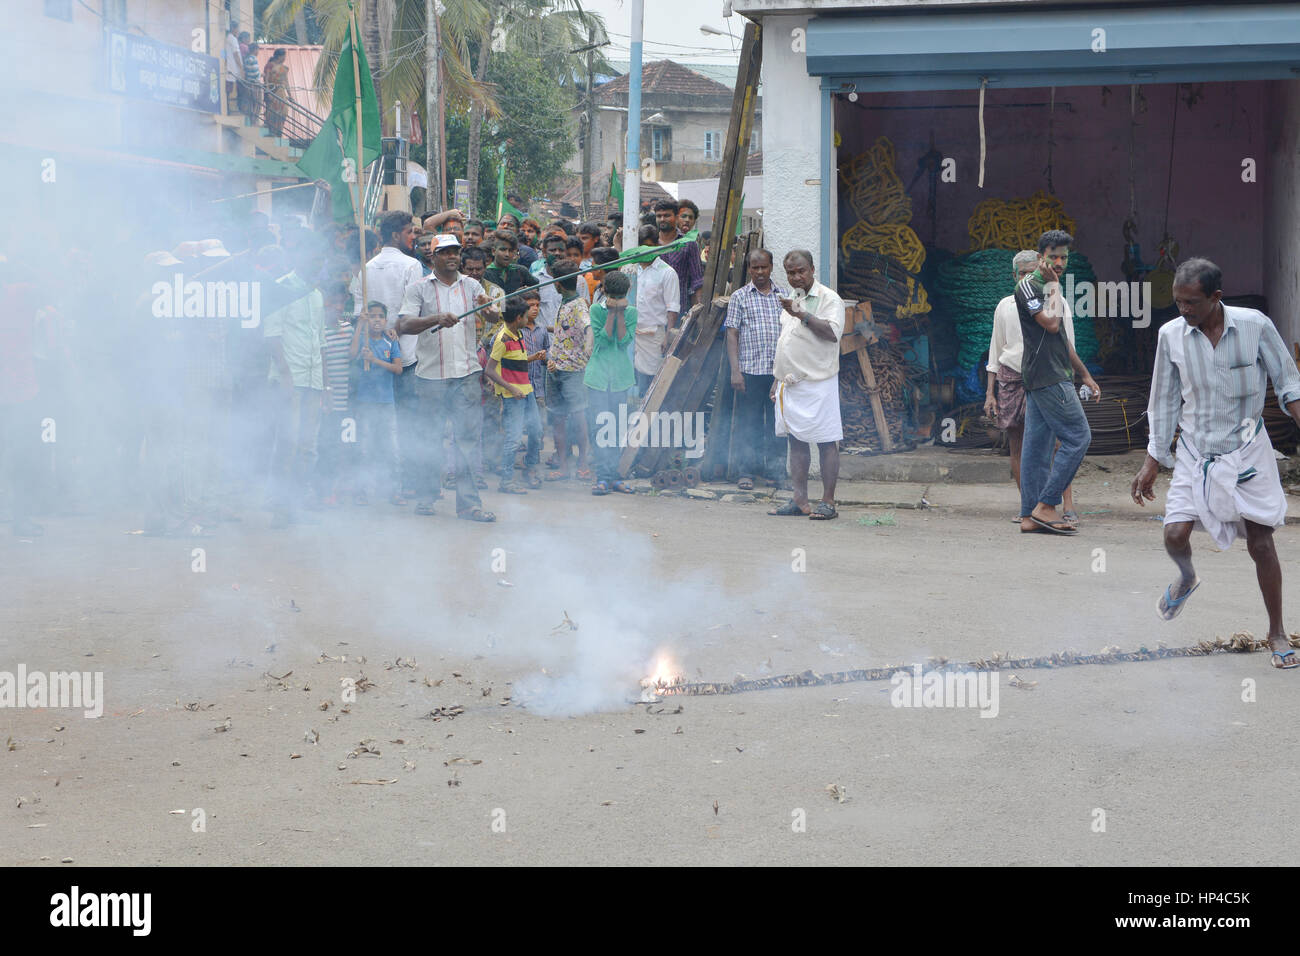 Kochi, India - November 7, 2015 - Indian muslims protesting on street after elections Stock Photo